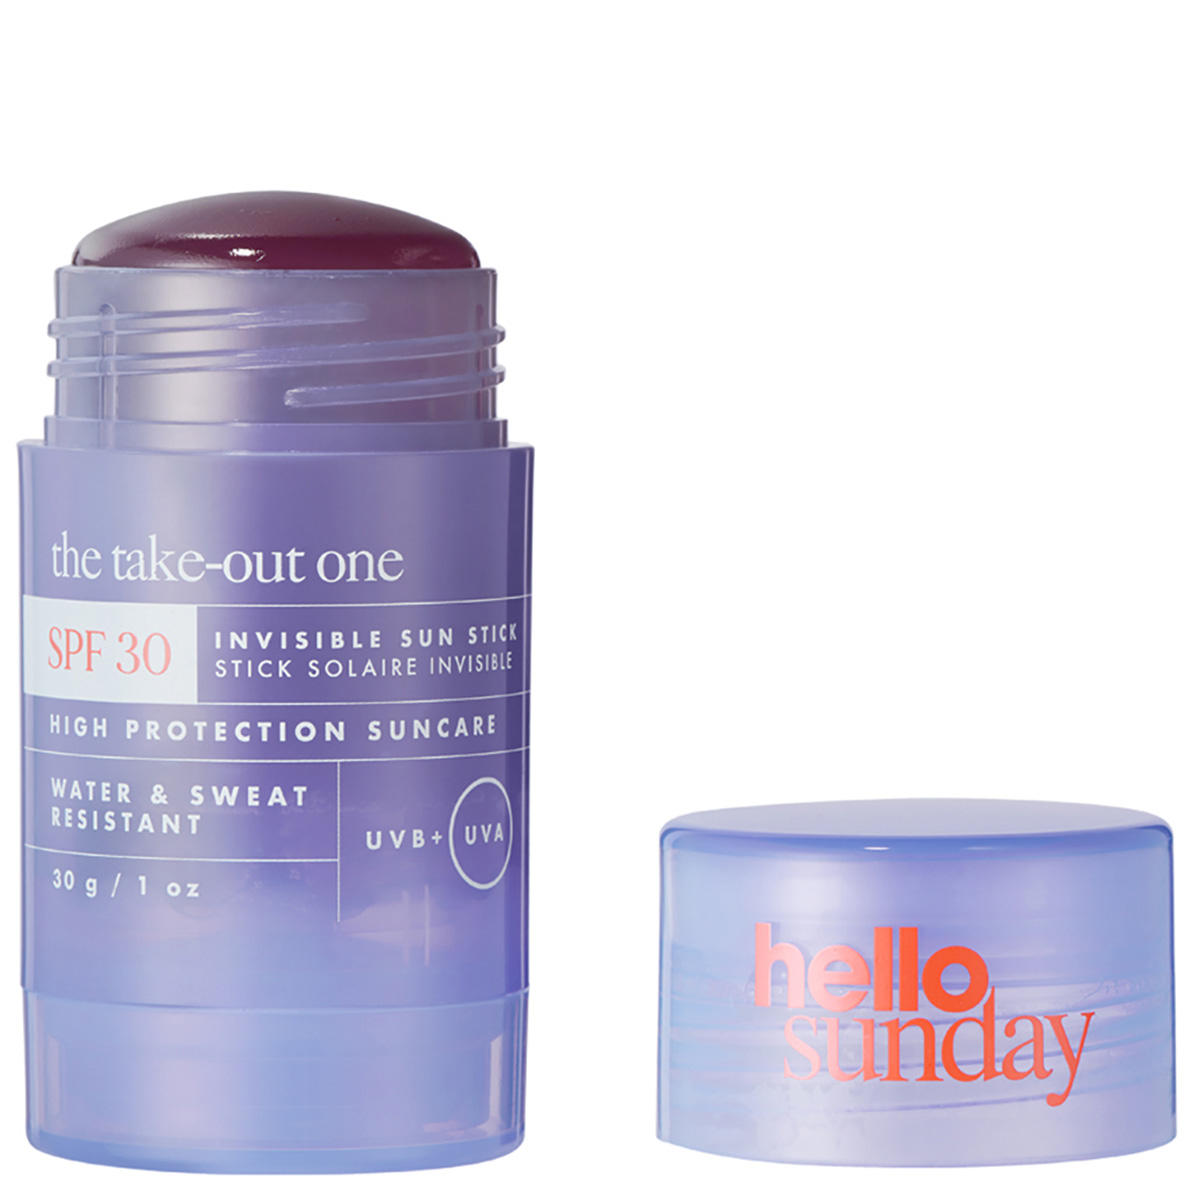 hello sunday the take-out one Invisible sun stick SPF 30 30 g - 2